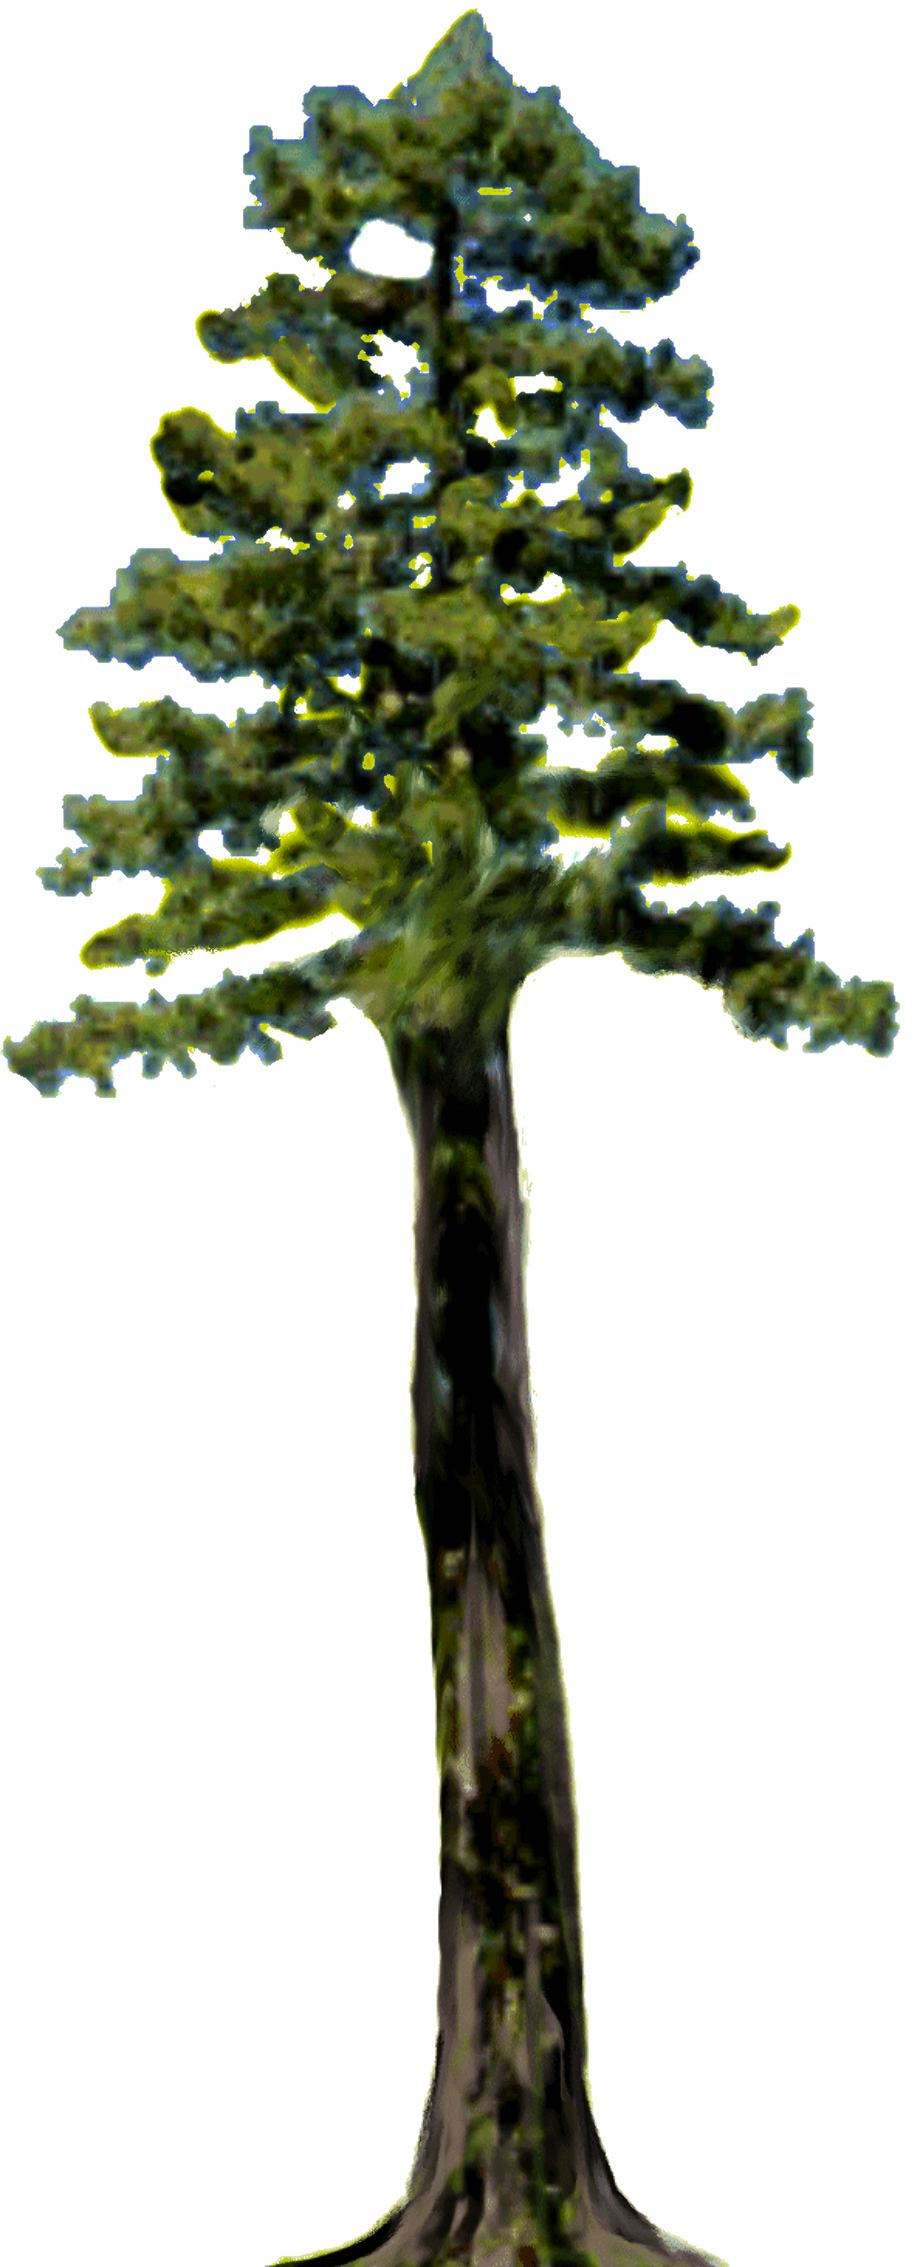 Download High Quality Tree clipart redwood Transparent PNG Images Art